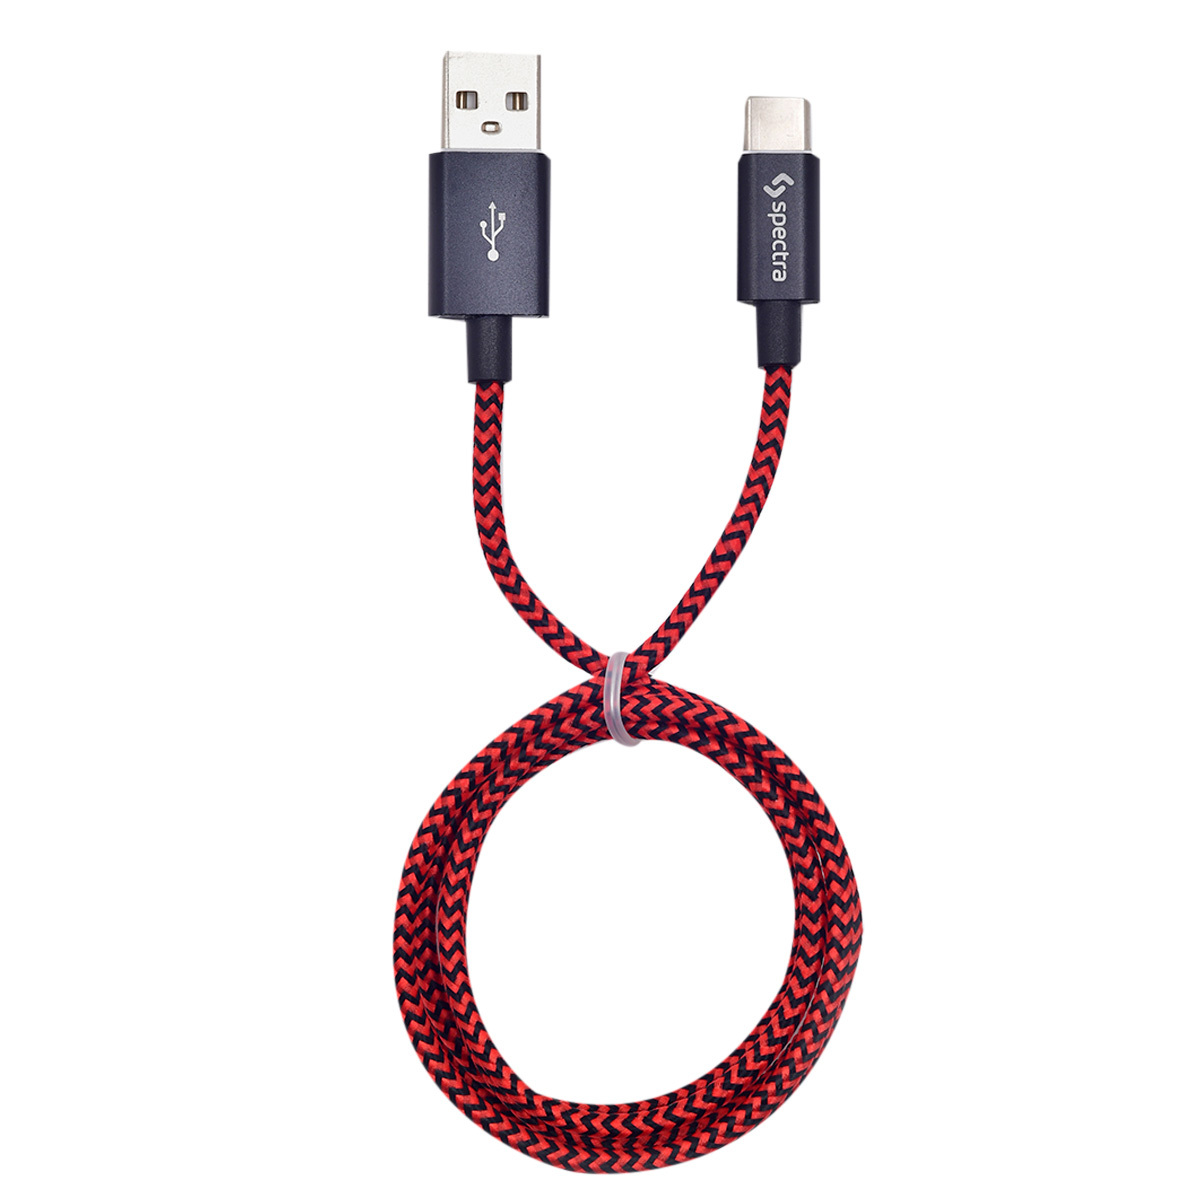 CABLE USB A TIPO-C SPECTRA IK40307G (NEGRO, 91CM) | Office Depot Mexico